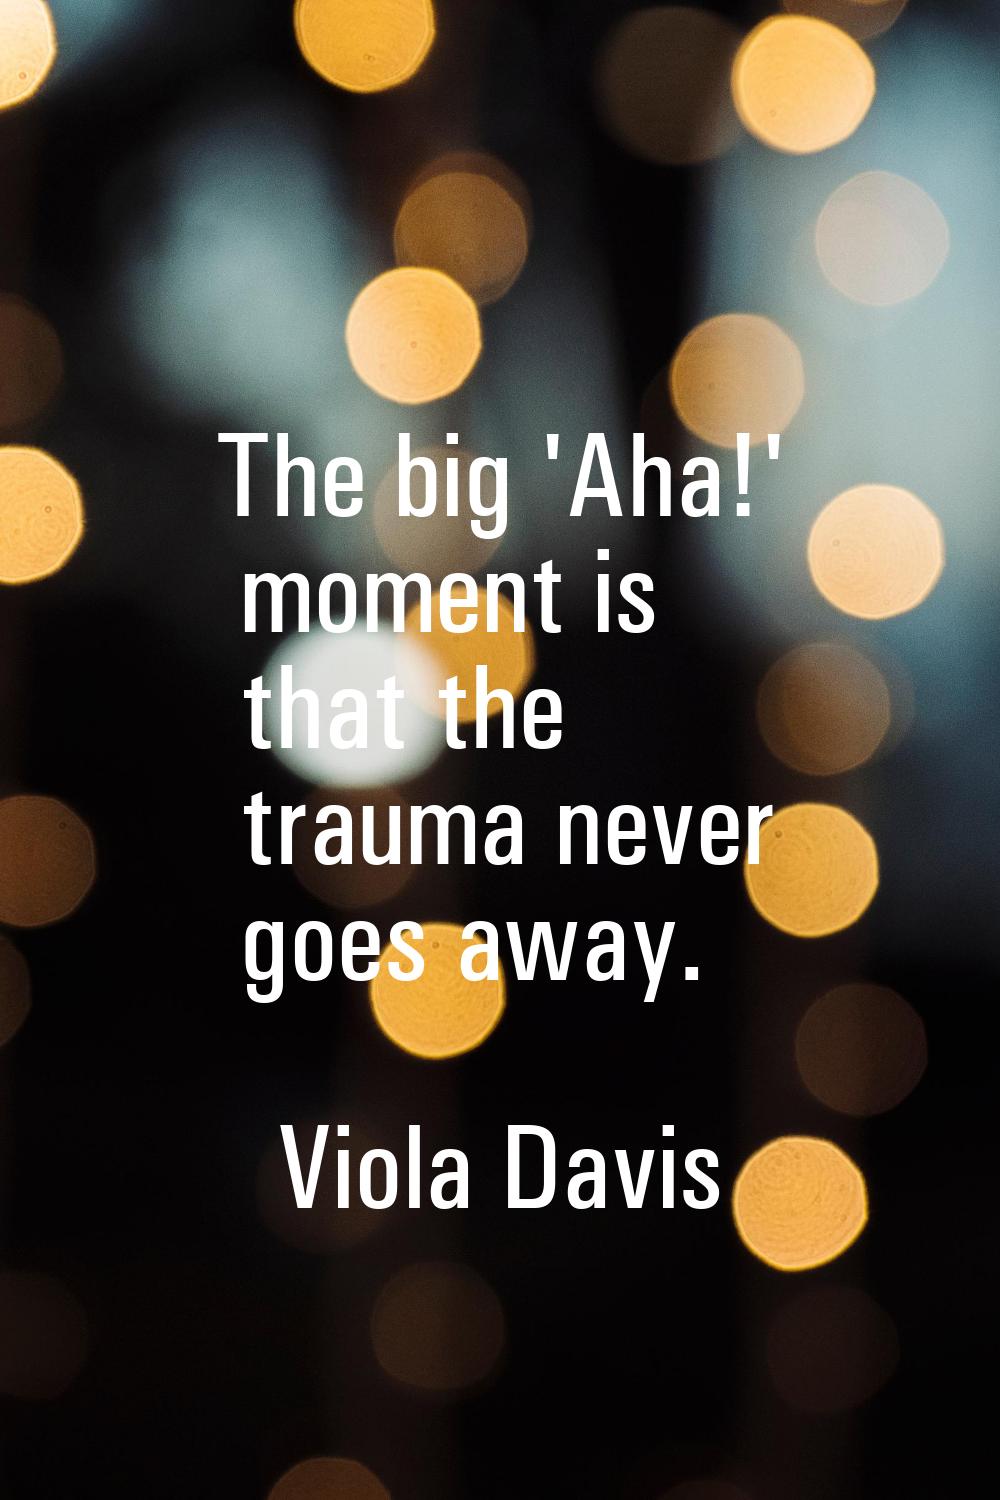 The big 'Aha!' moment is that the trauma never goes away.